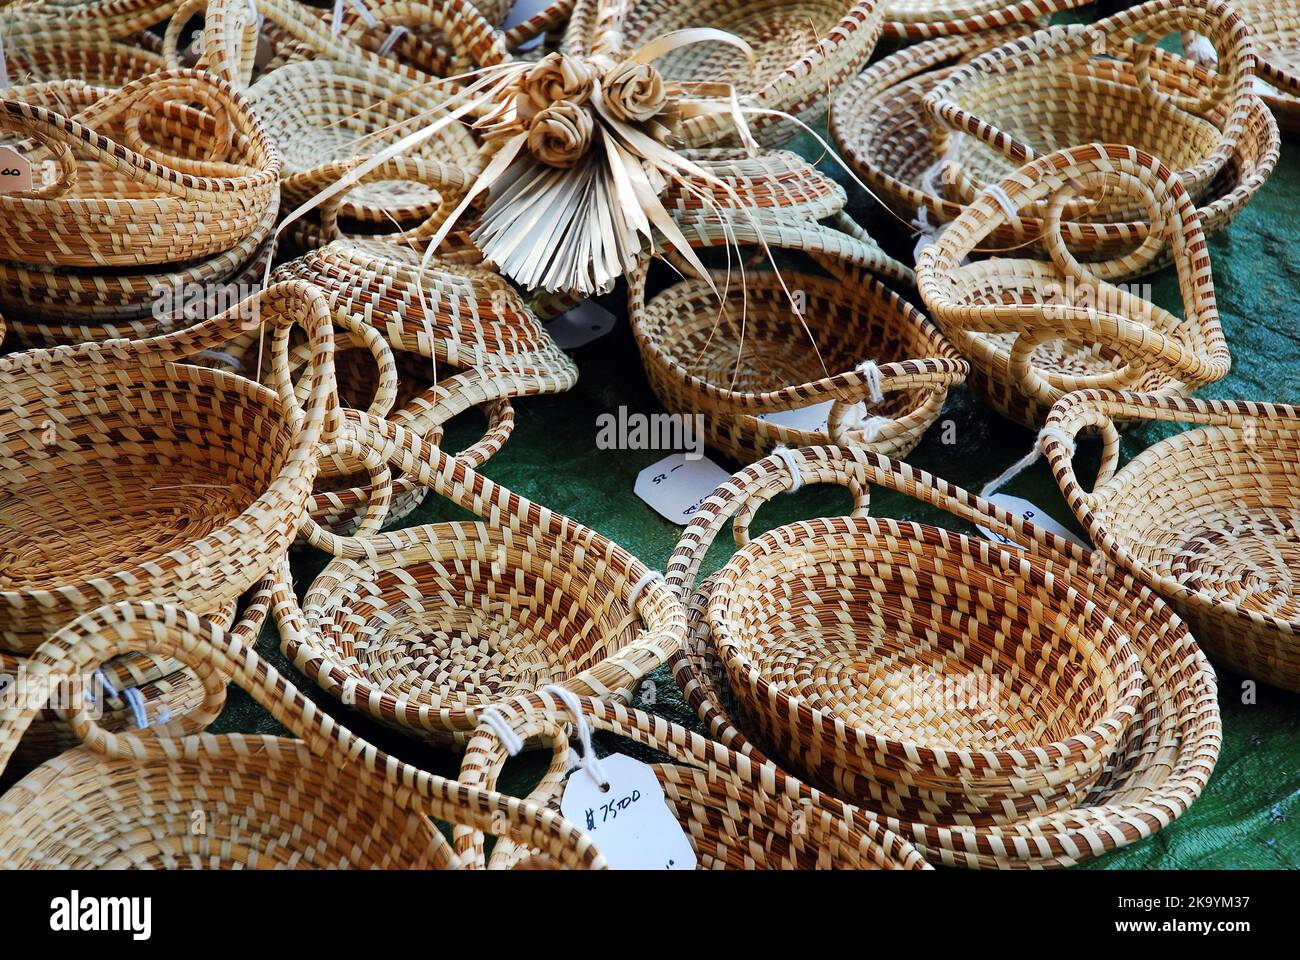 Handmade Sweetgrass, a South Carolina Low Country Traditional Craft of the Gullah culture, is on Display at Charleston's City Market Stock Photo